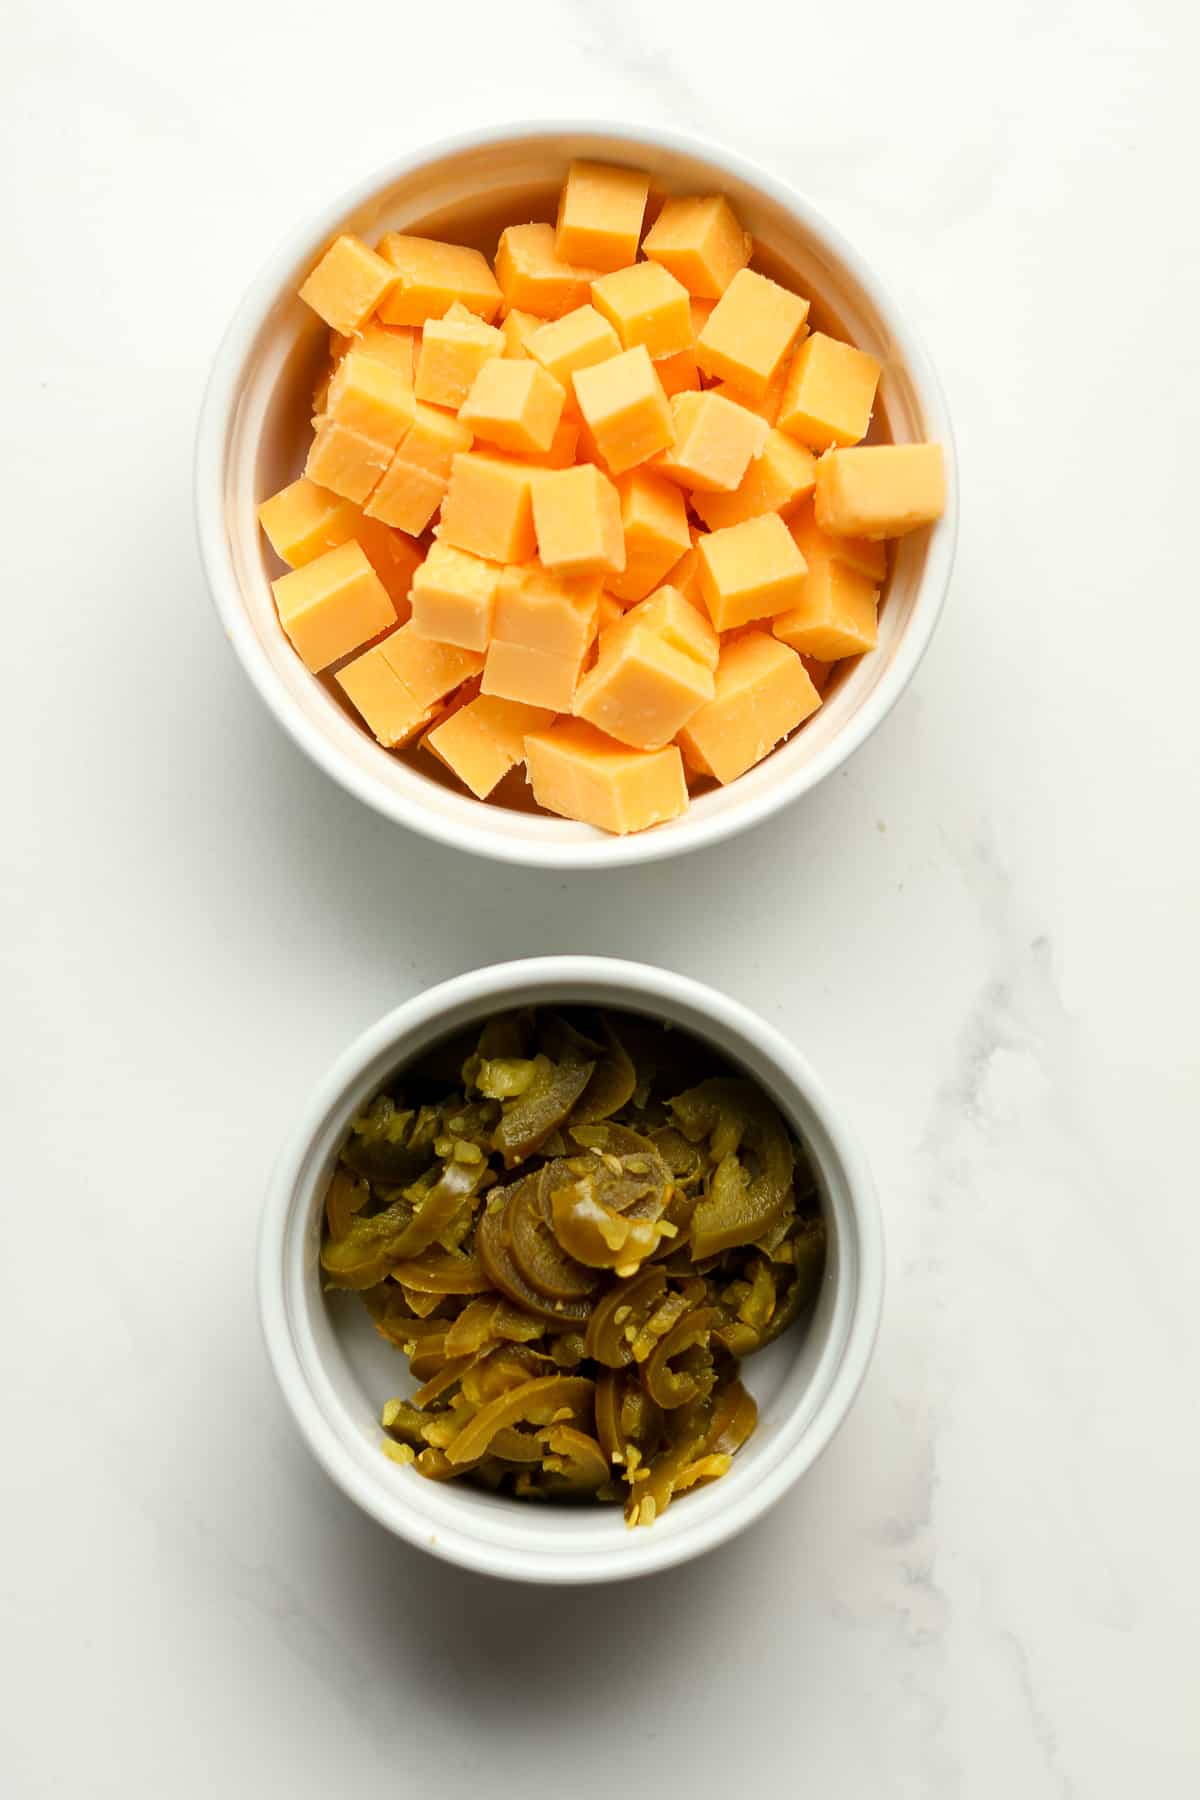 Bowls of cheddar cubes and jalapeño slices.